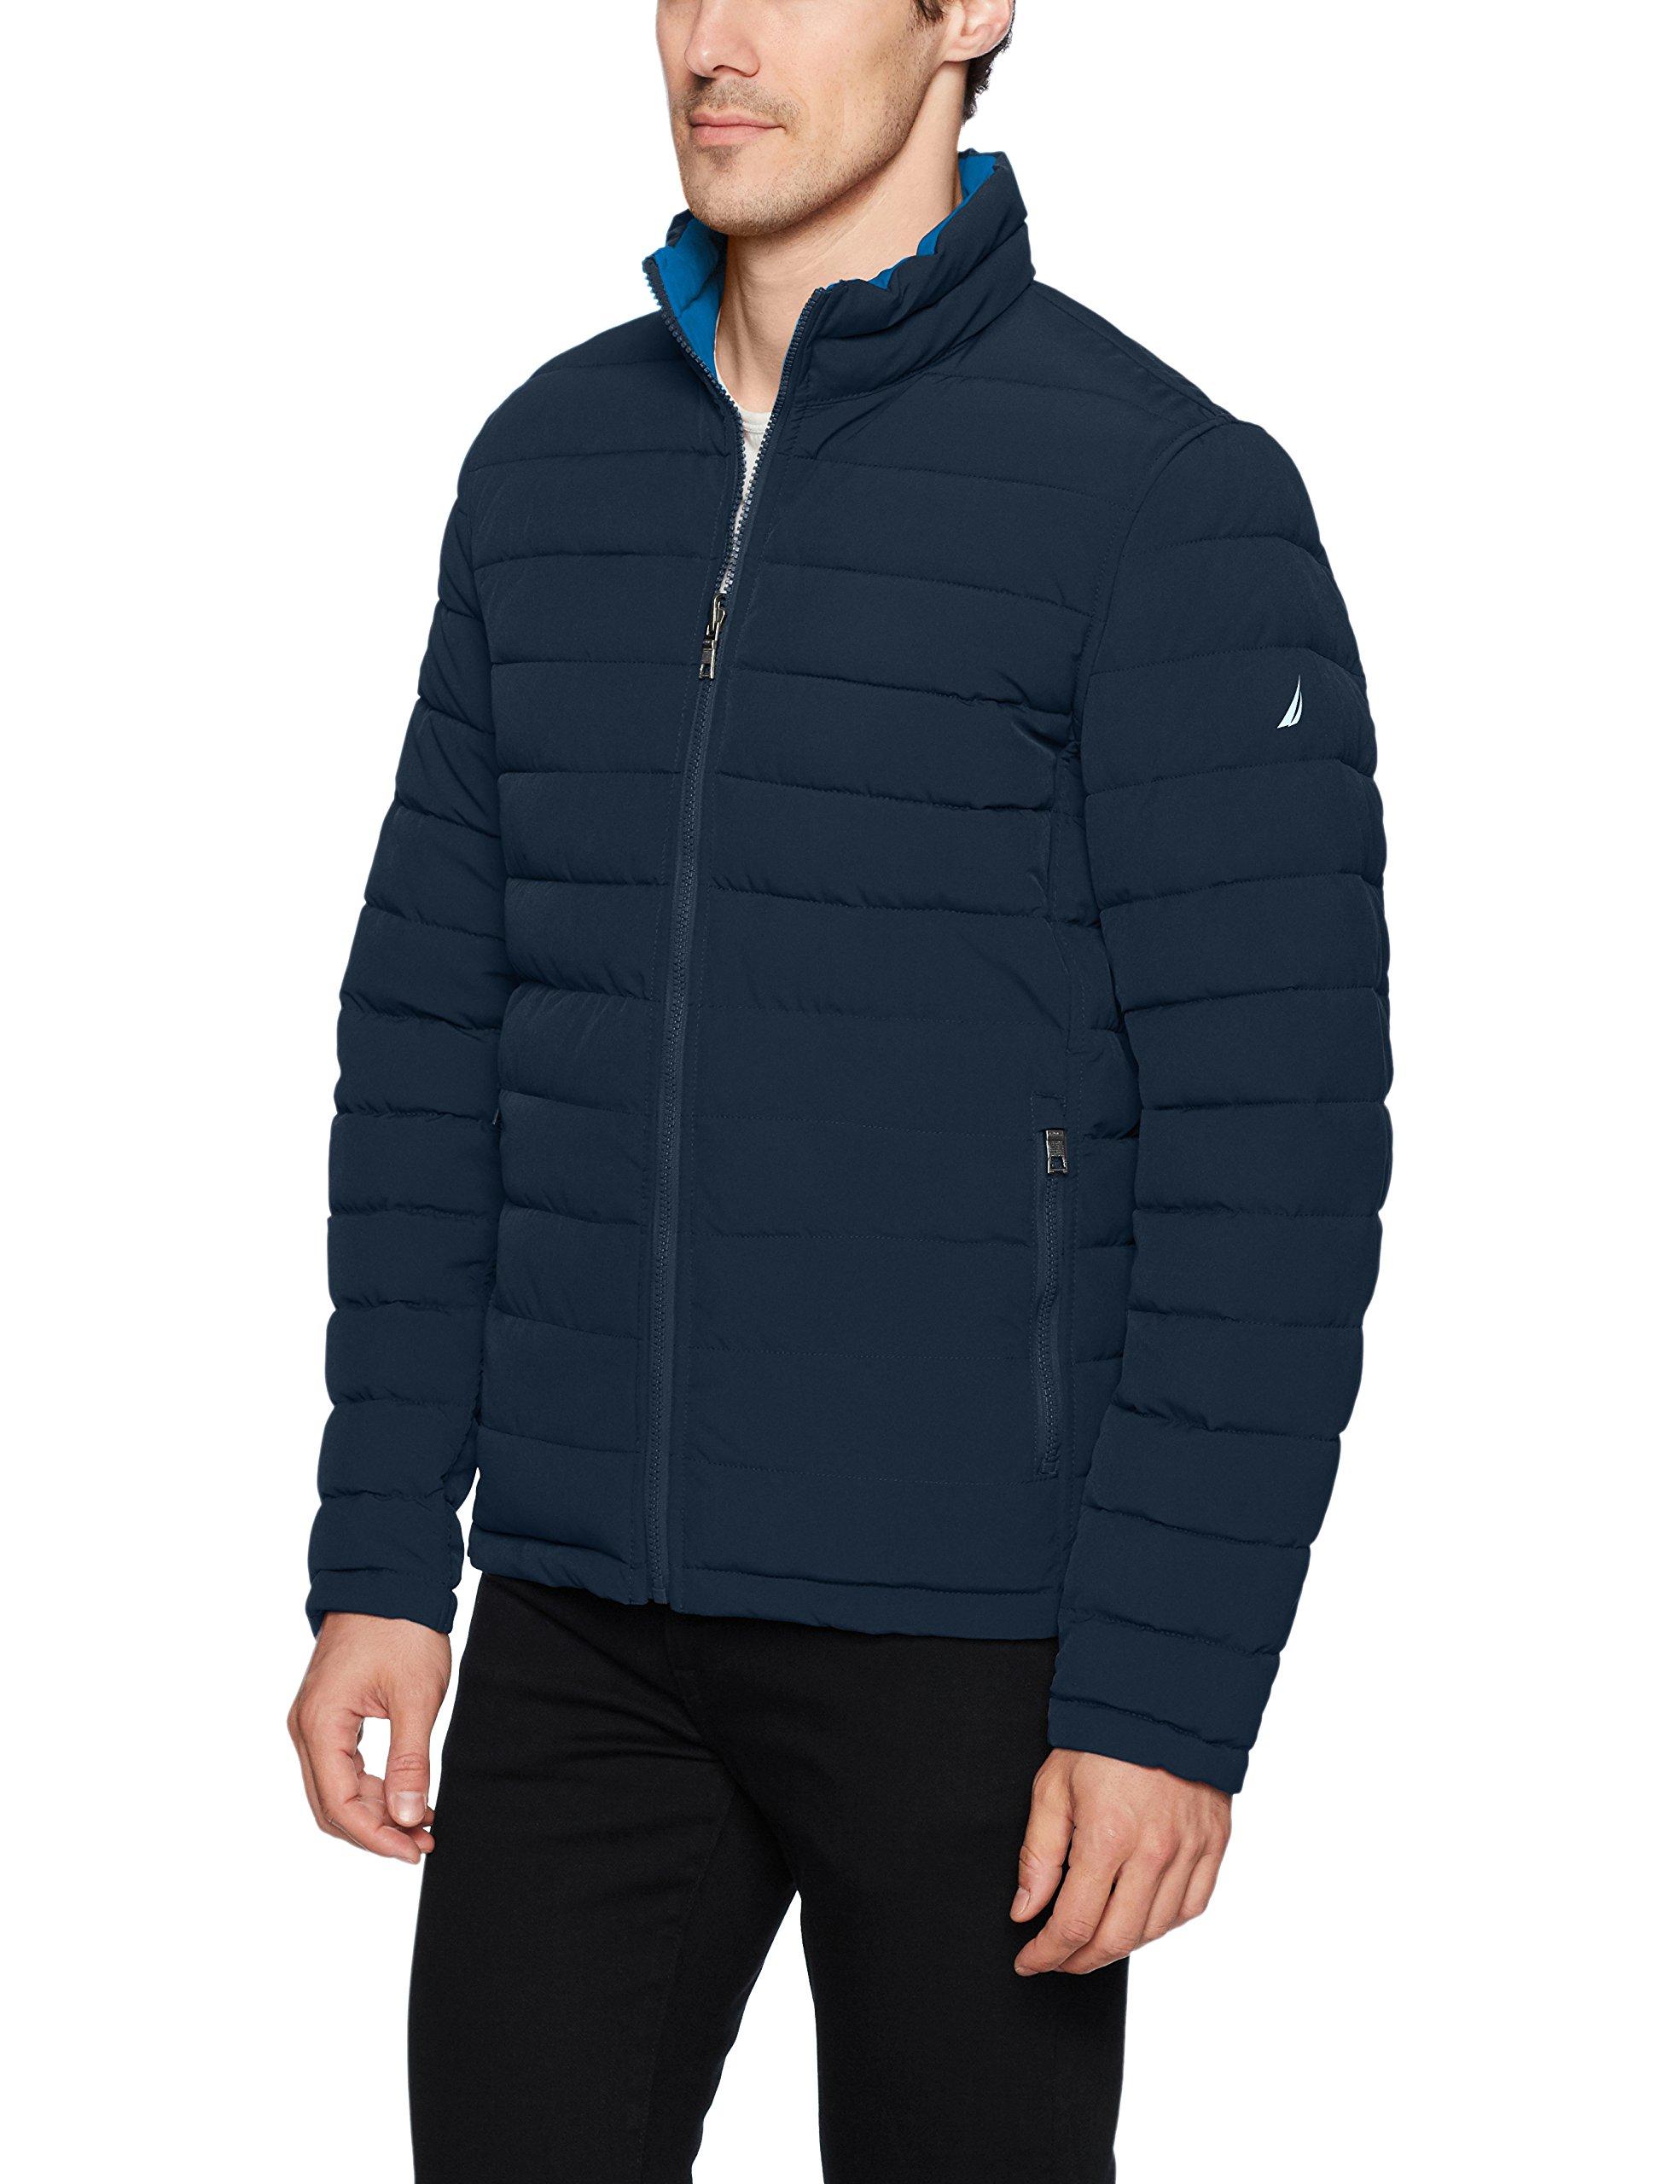 Nautica Men's Quilted Stretch Reversible Jacket - Macy's